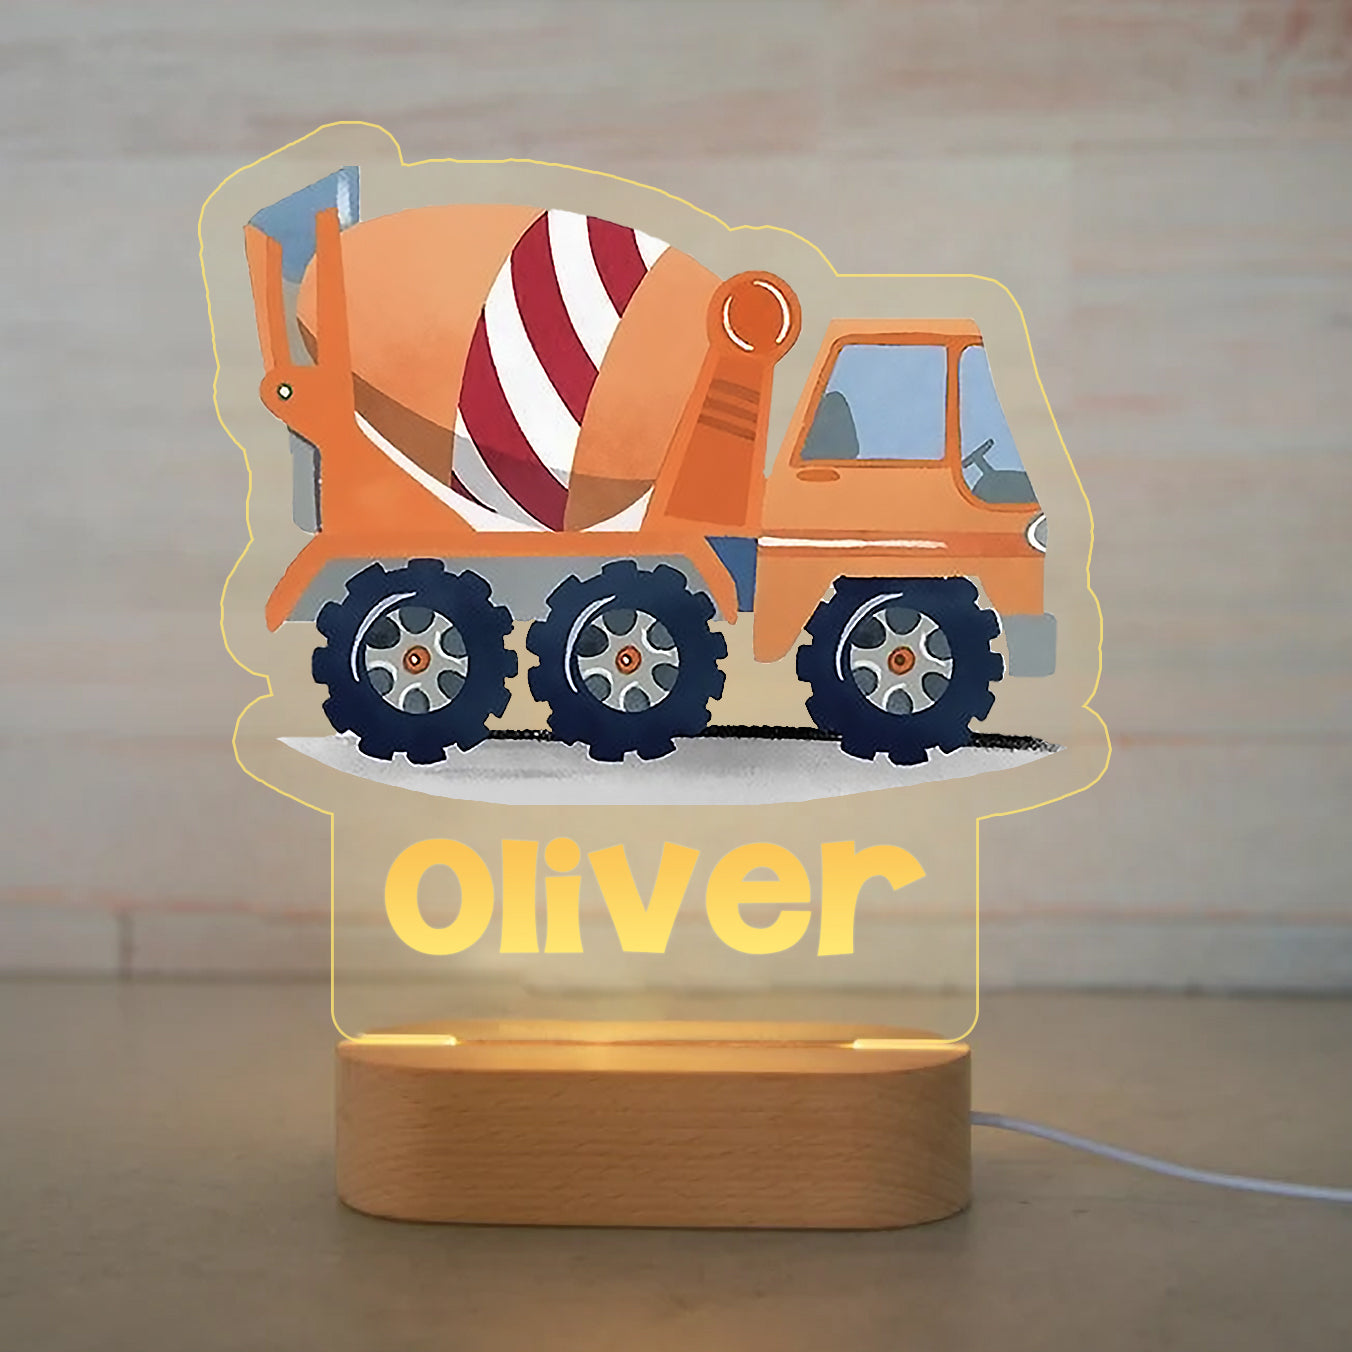 Custom Name Night Light for Kids - Personalized Cartoon Cement Truck Night Light with LED Lighting for Children - Personalized It With Your Kid's Name -I32